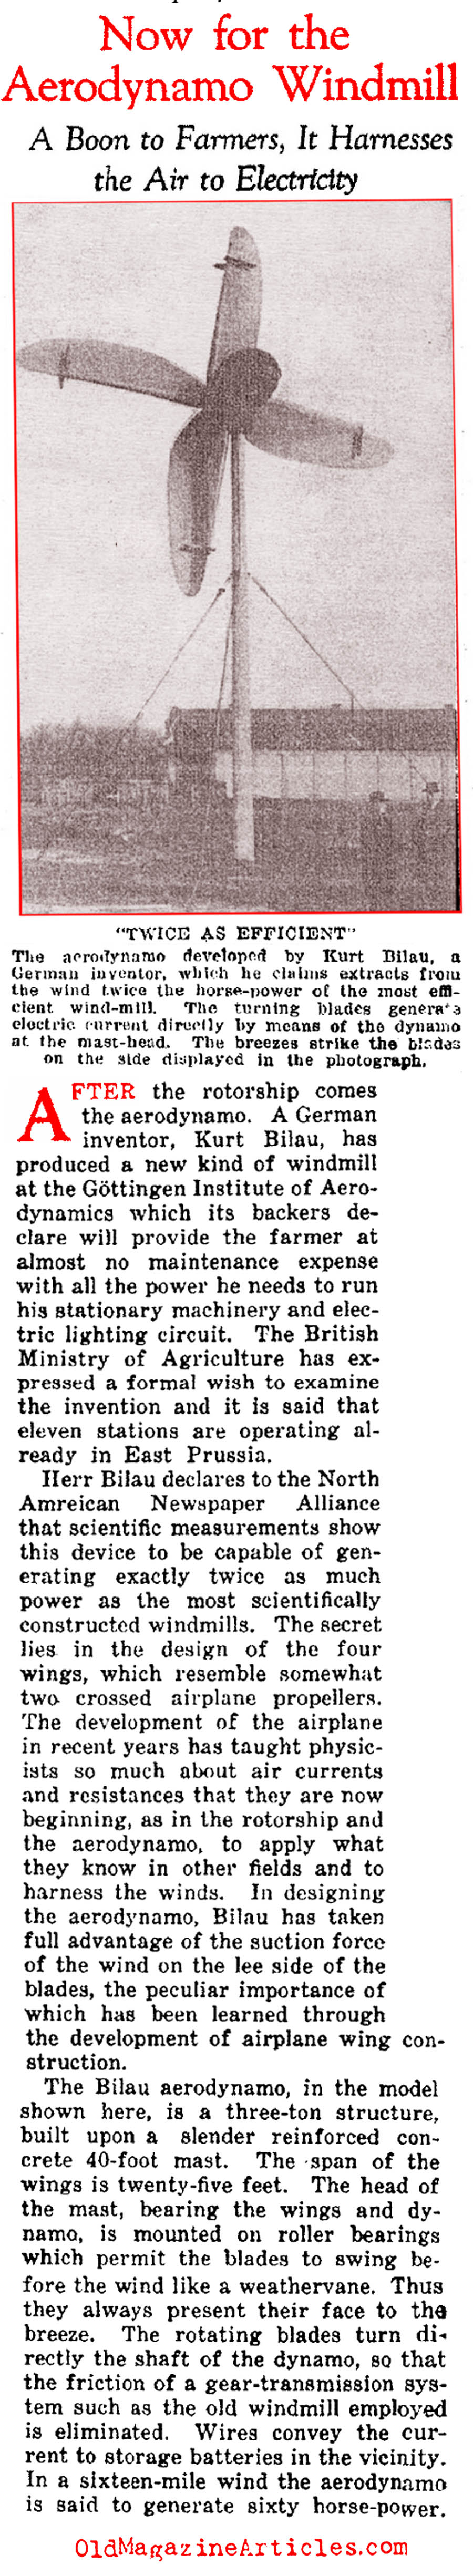 Recognizing the Potential of Wind Power (Current Opinion, 1925)